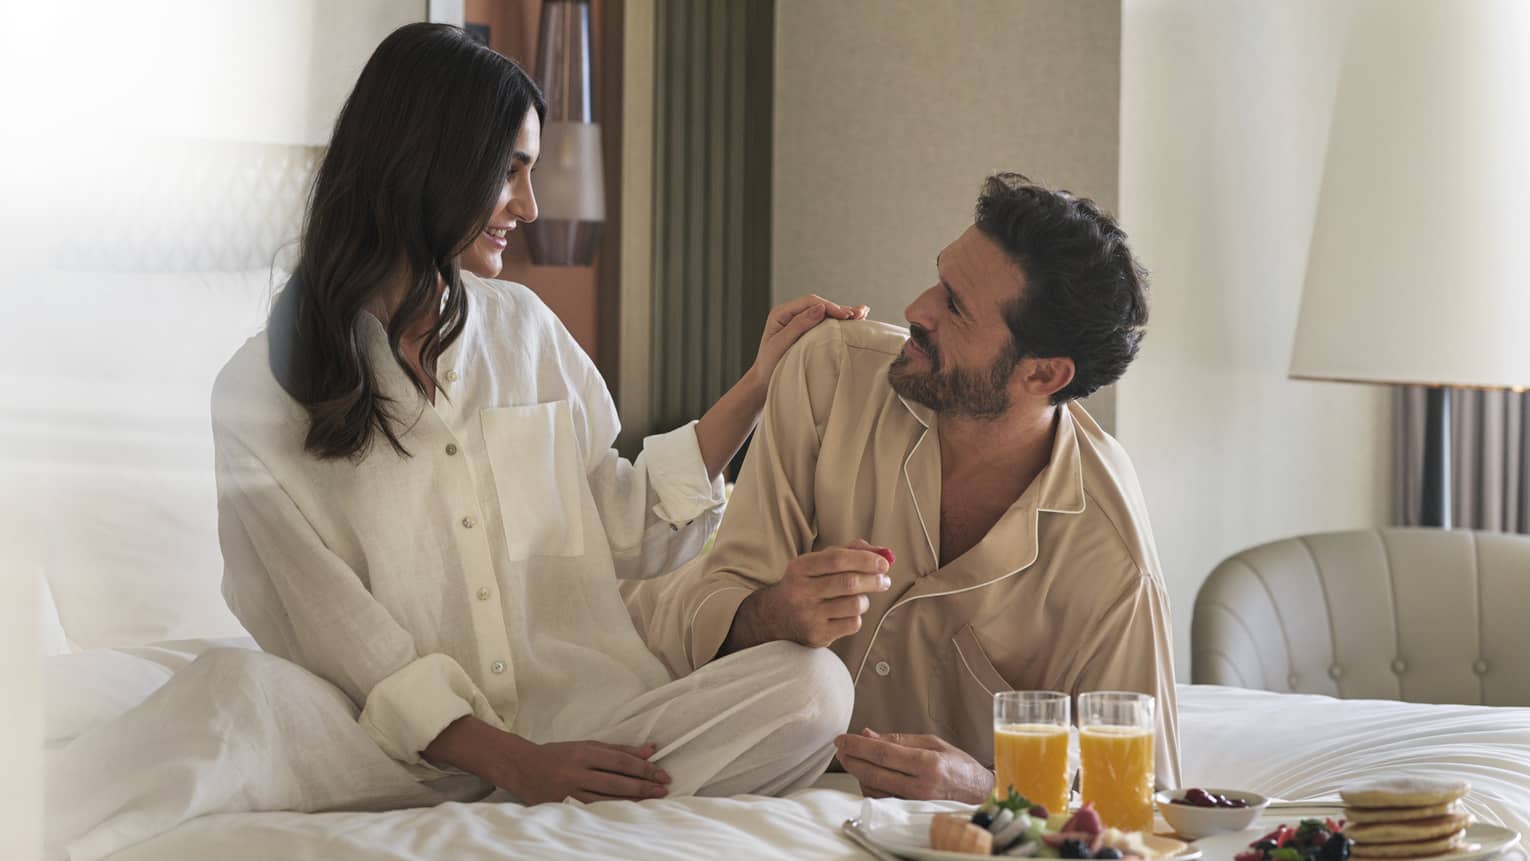 Pajama-clad couple enjoys in-room dining in their guest room